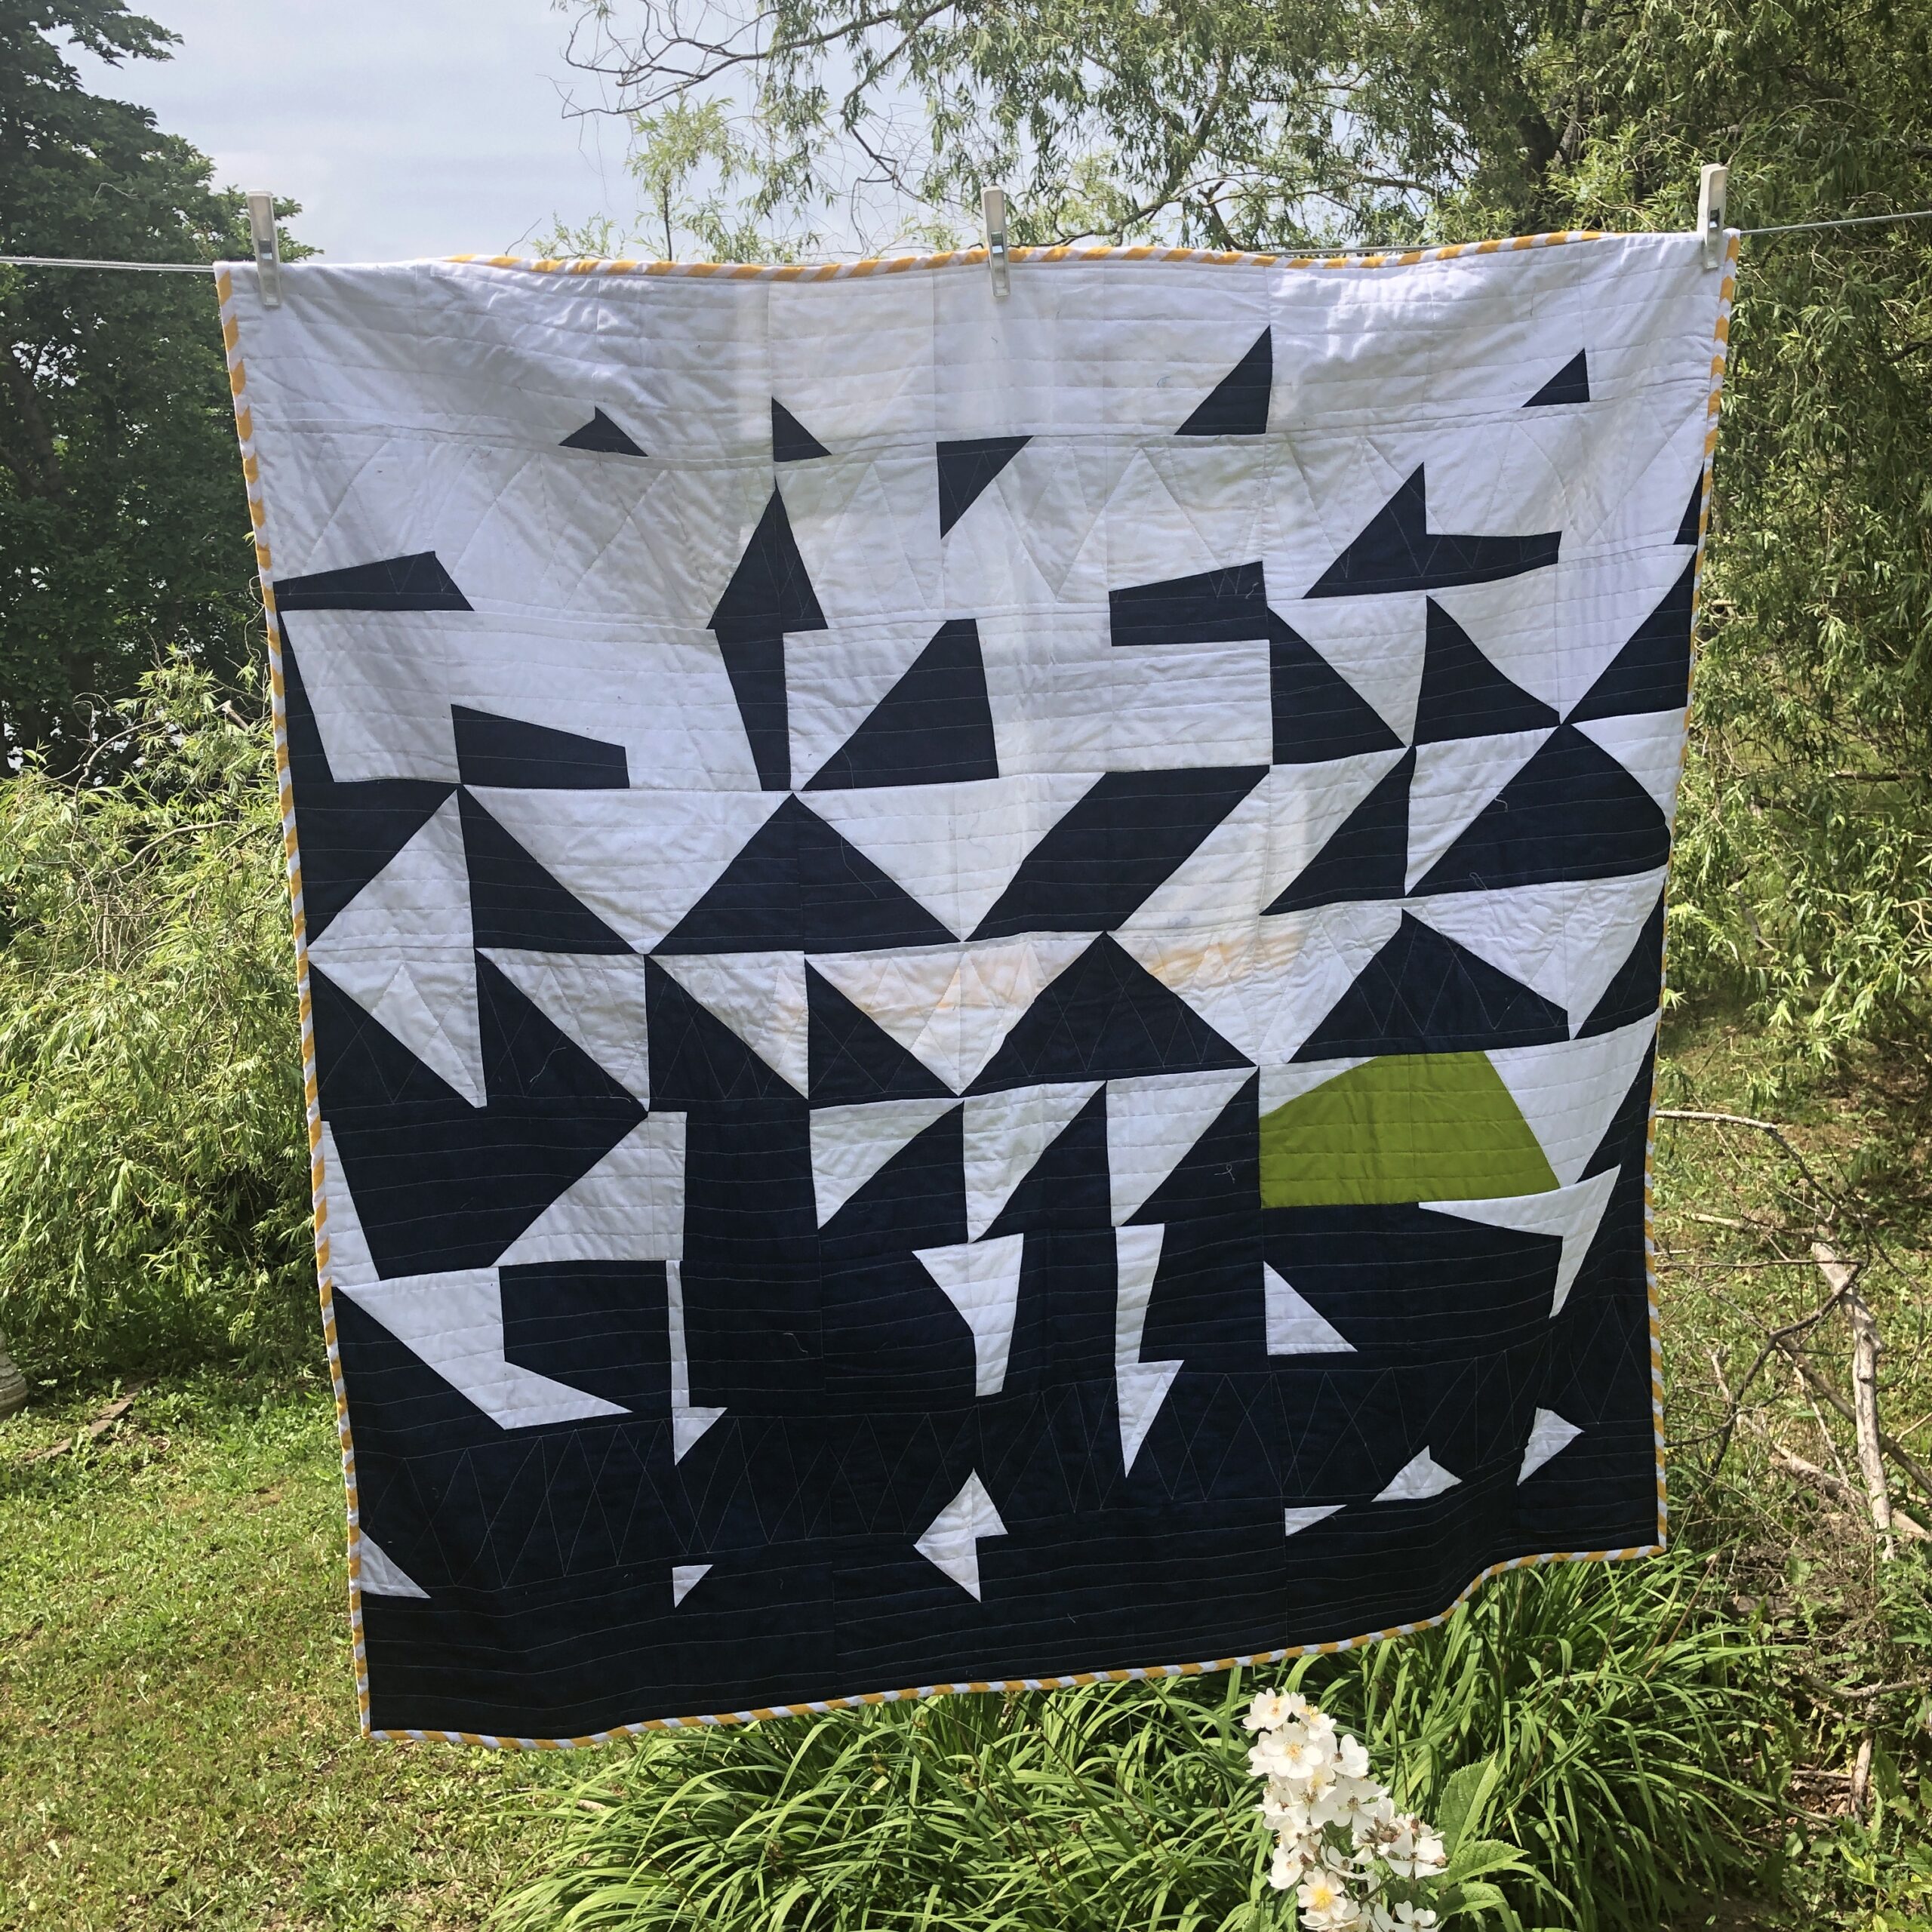 Shattered Quilt — covid quilt #2